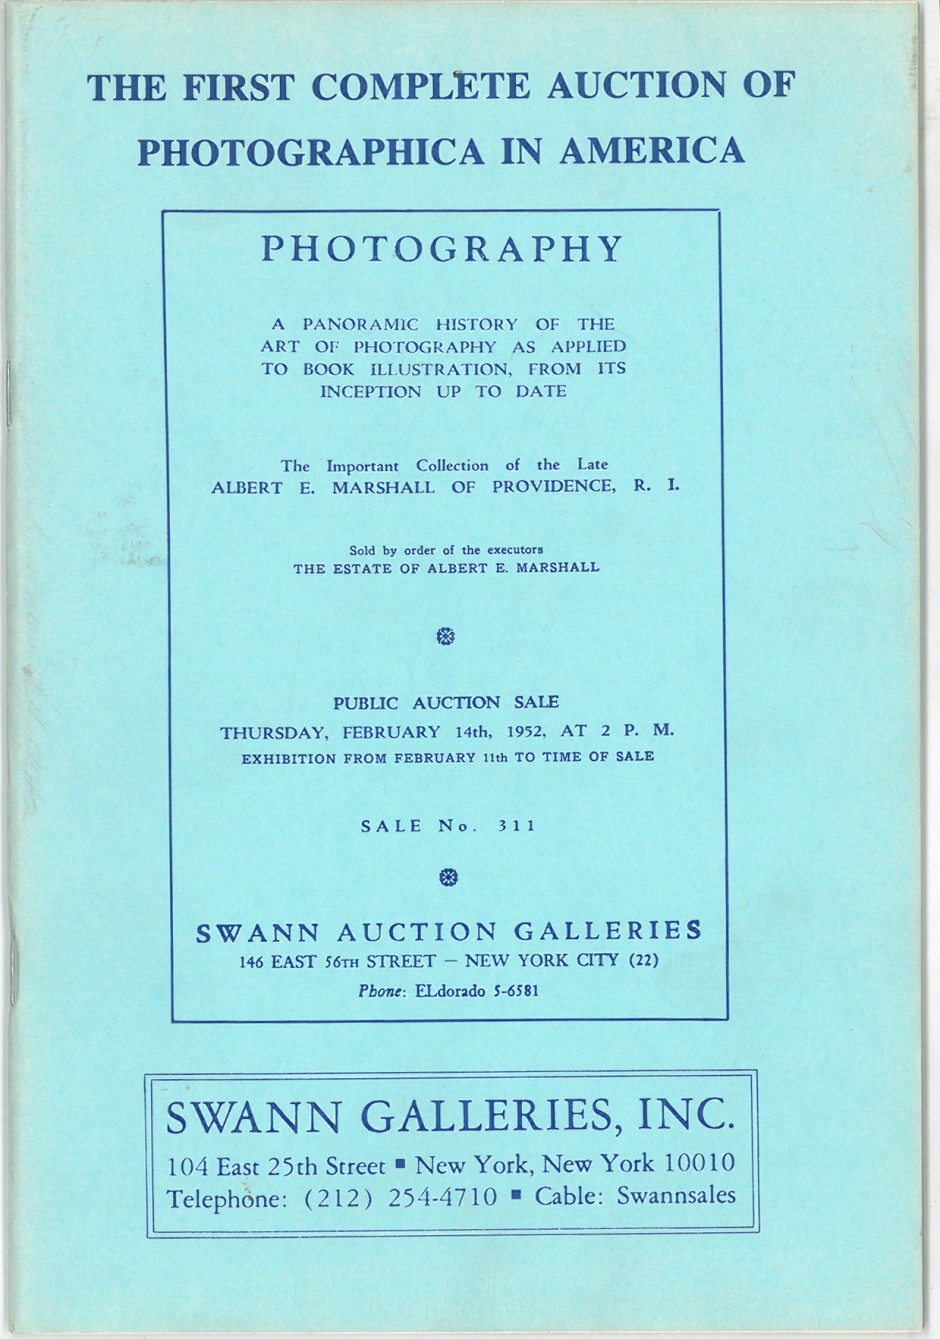 Cover of the Catalogue for America's first Photographs Auction